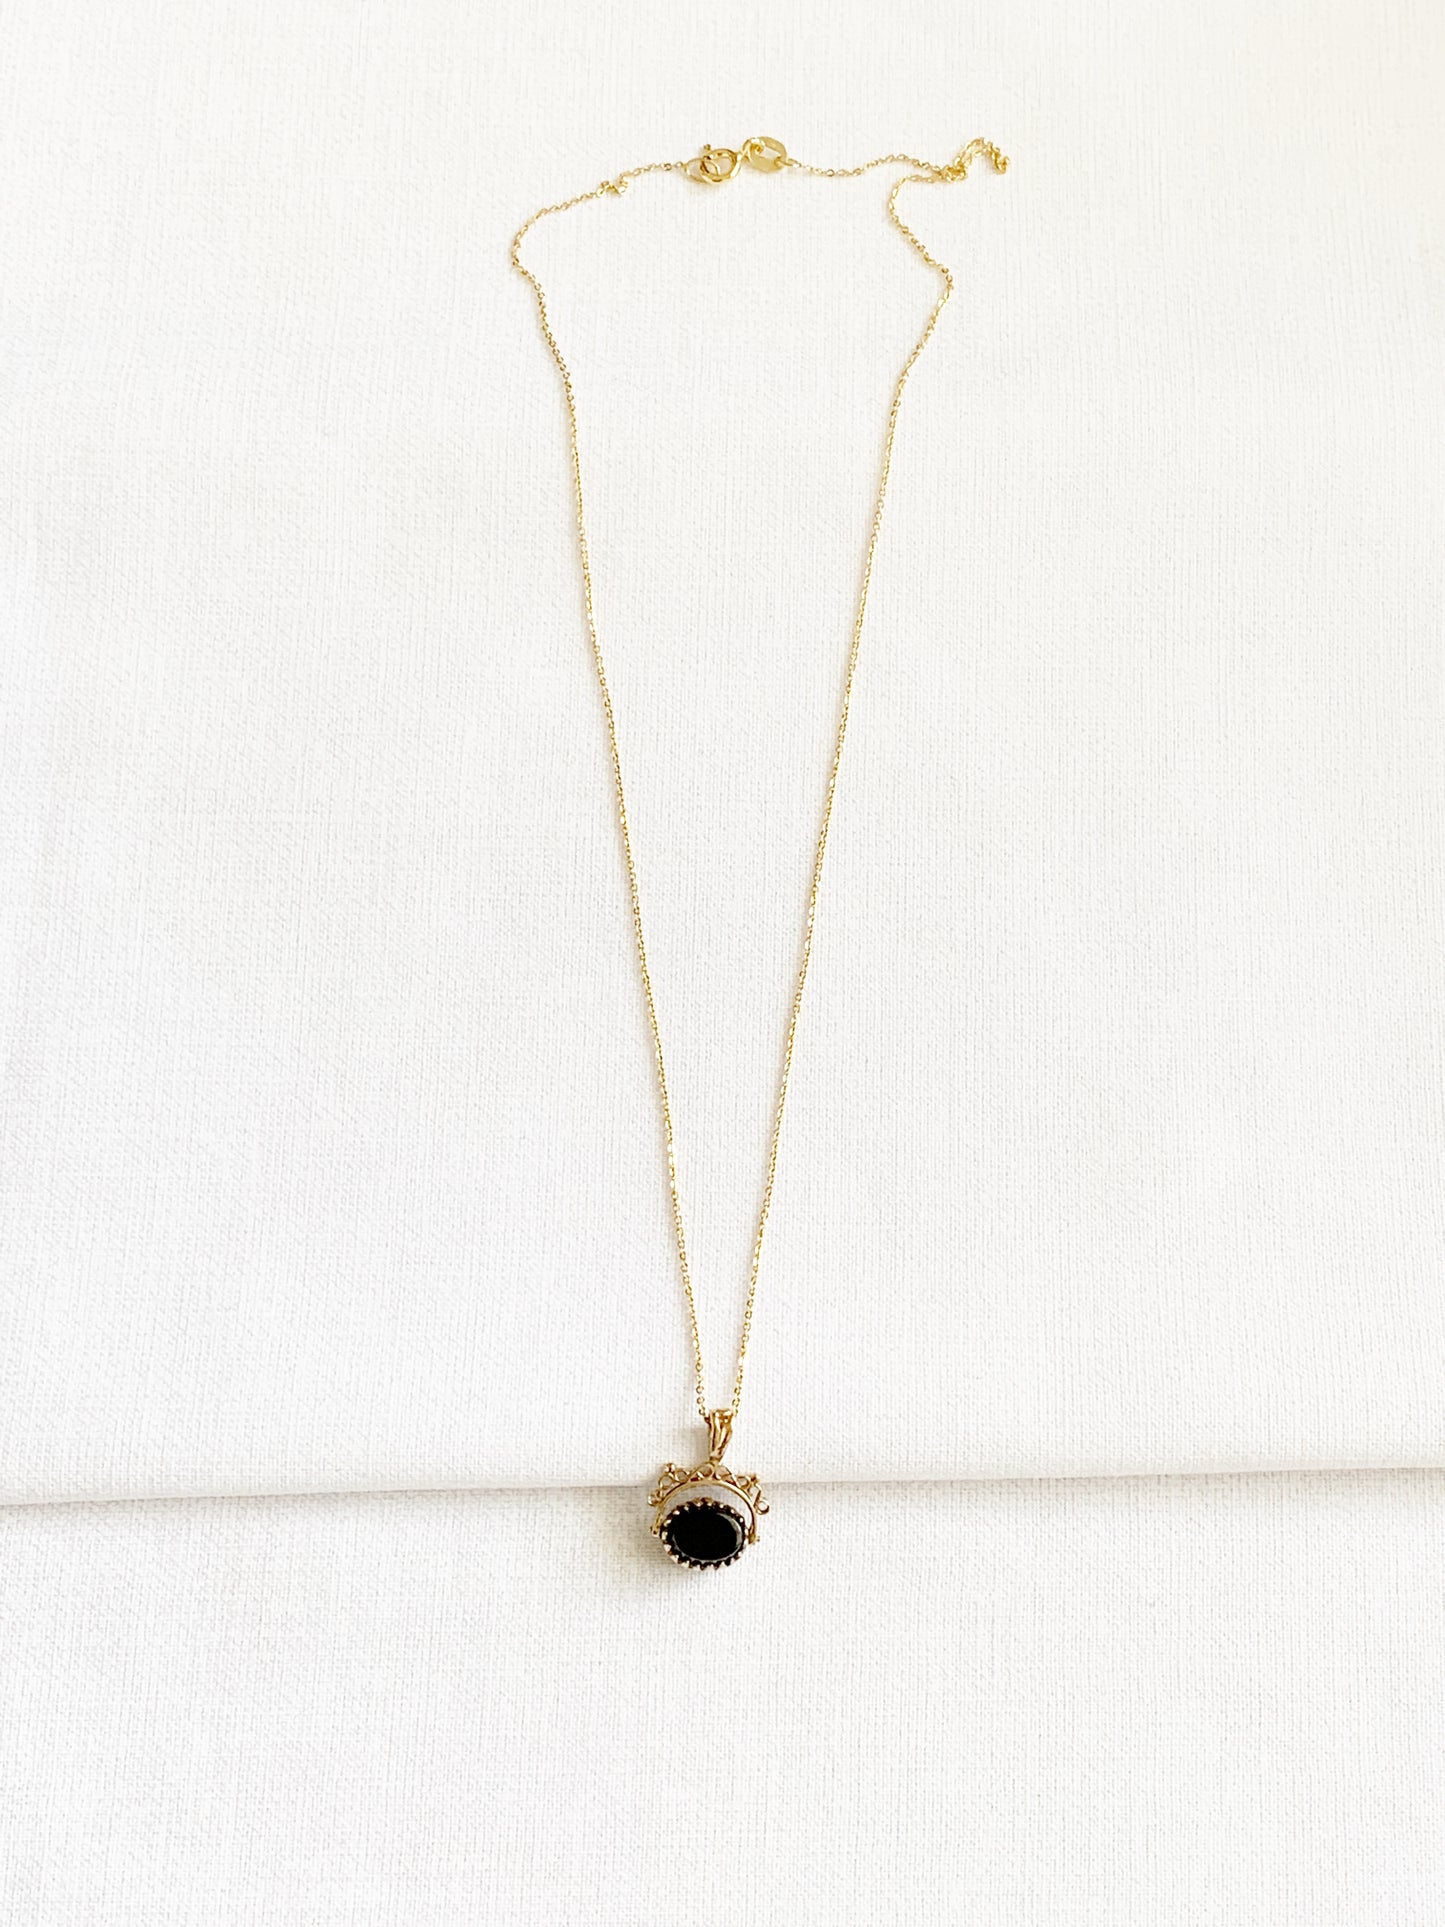 Vintage 9ct Gold Onyx Spinner Pendant Necklace